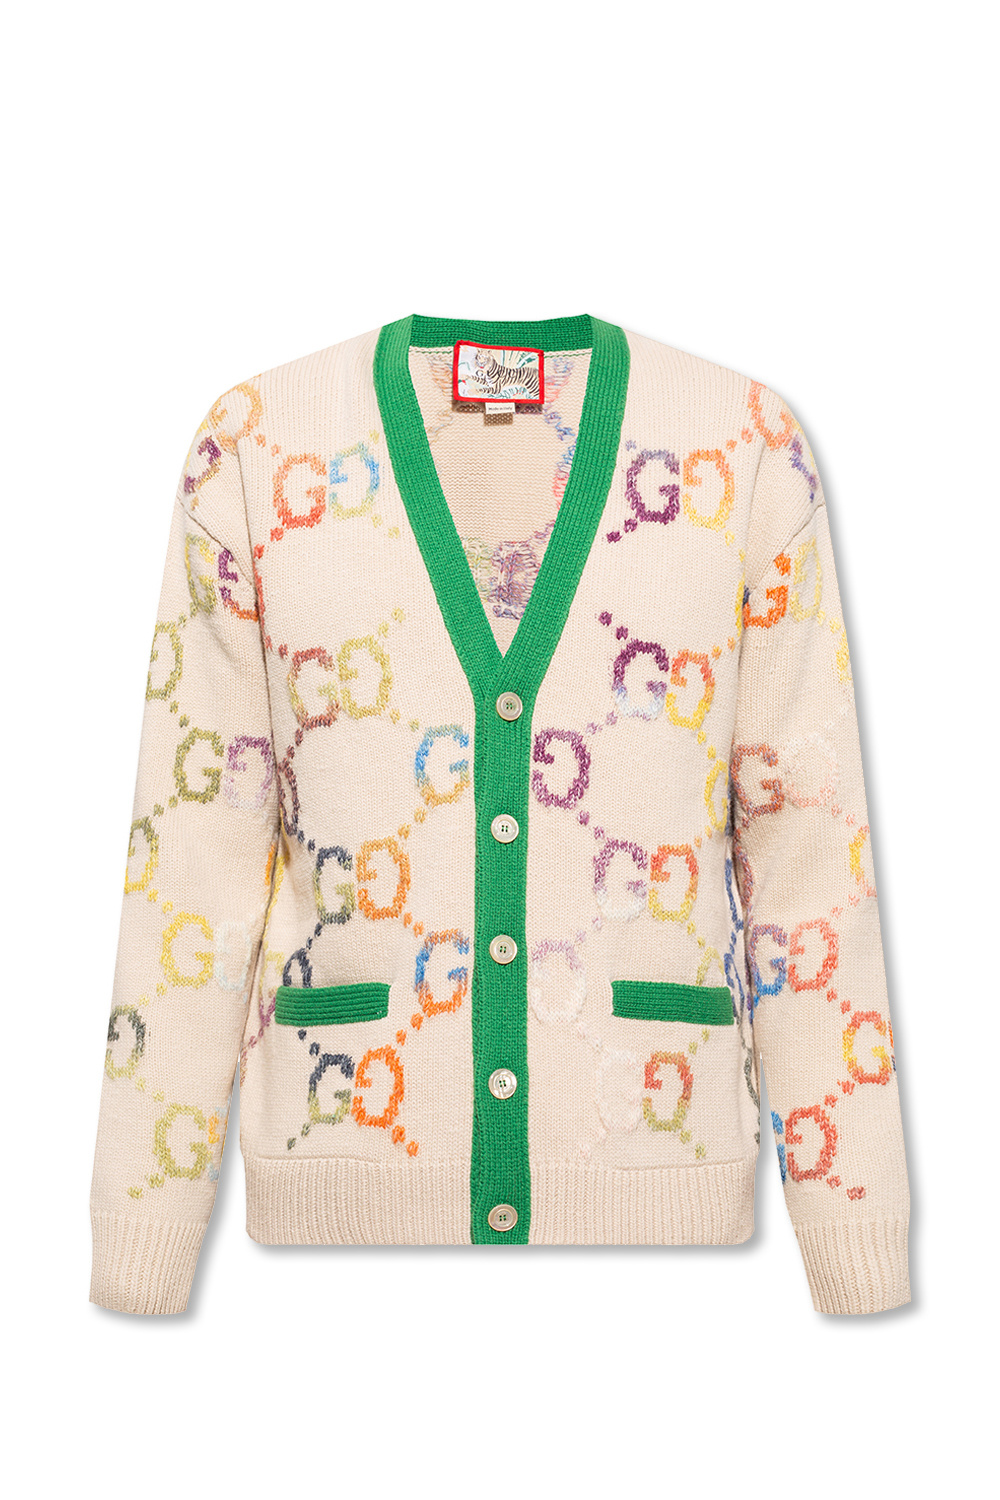 Gucci Cardigan from the 'Gucci Tiger' collection | Men's Clothing